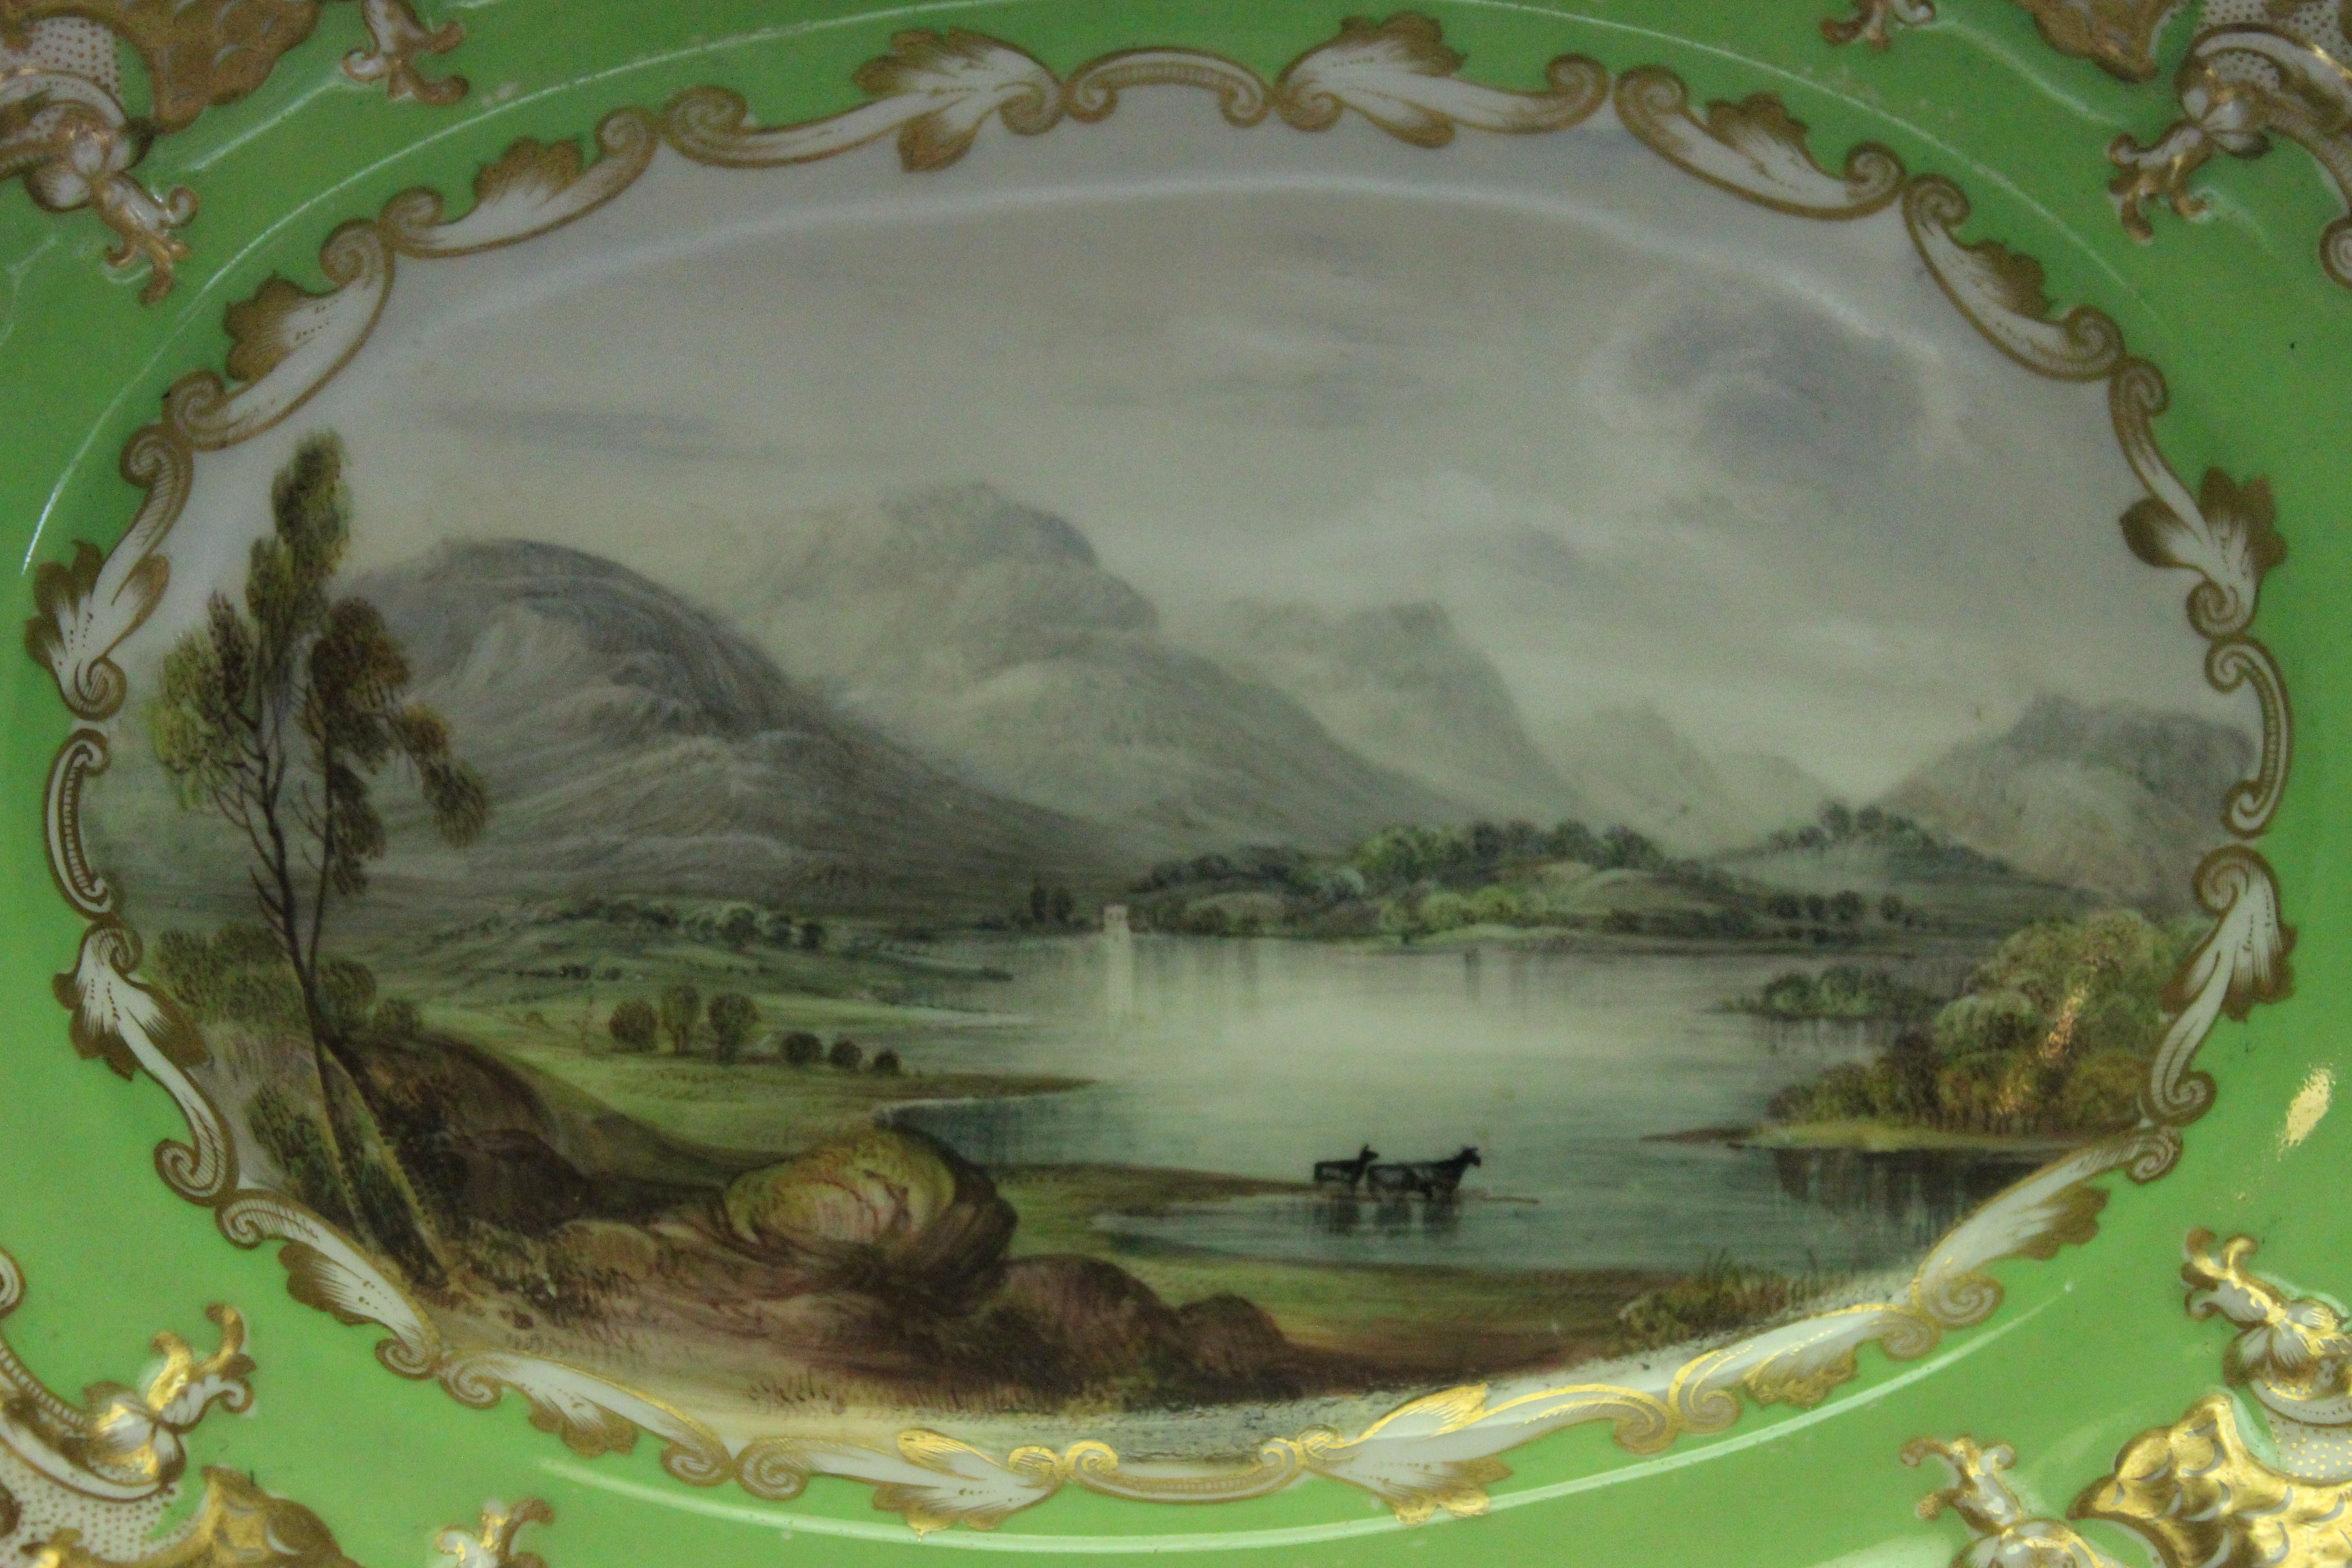 This Copeland & Garrett hand painted bowl features a central scene of Loch Achray by the Copeland and Garret artist/gilder Mansfield, which is surrounded by an apple green ground. Mansfield was at Copeland and Garrett from around 1849 to 1860. The